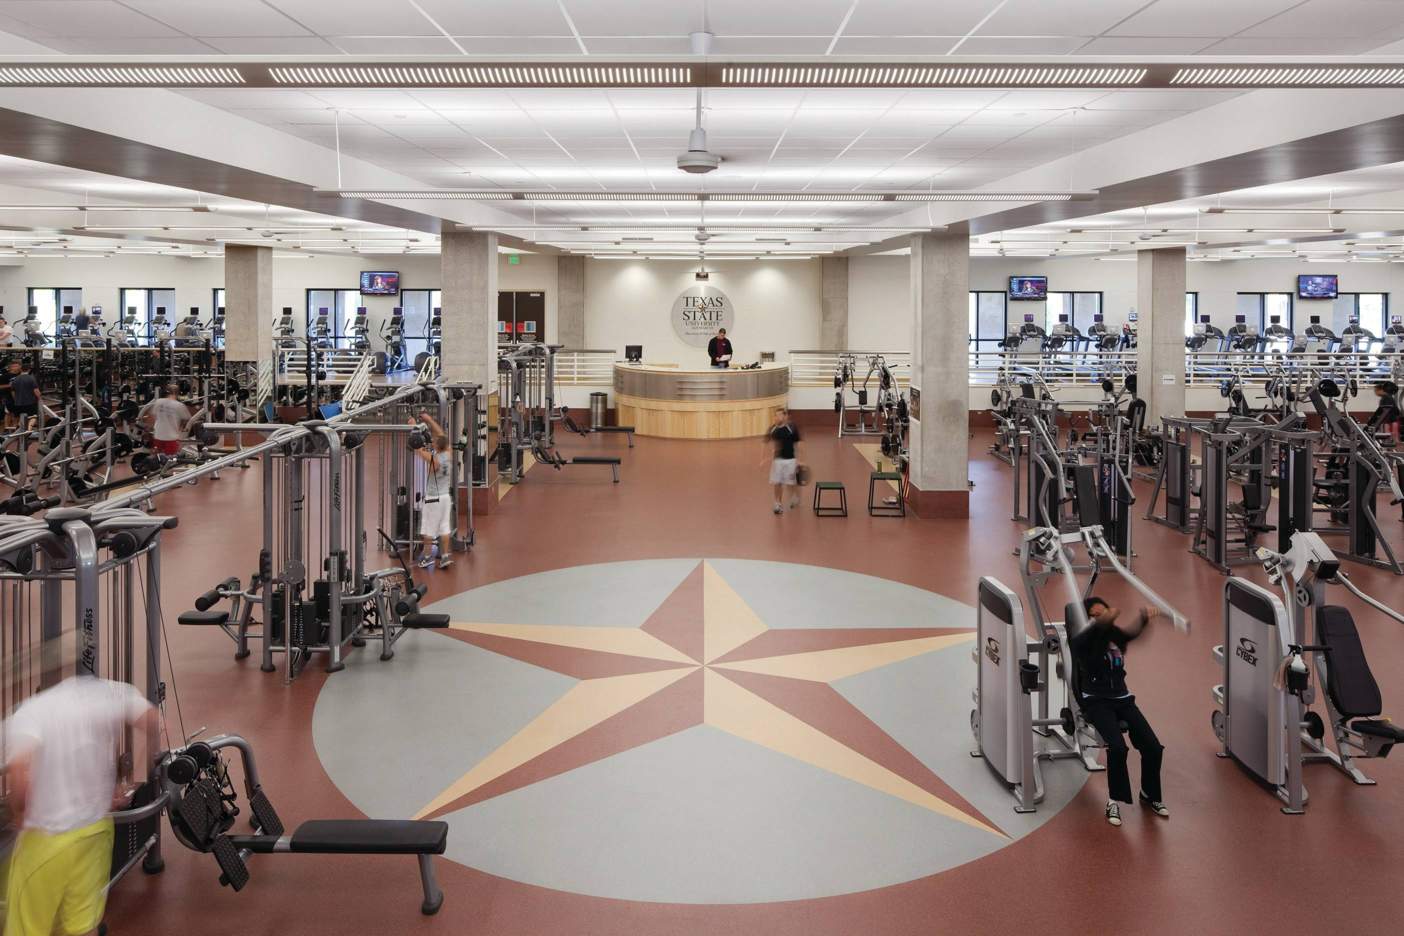 Center of Weight Room